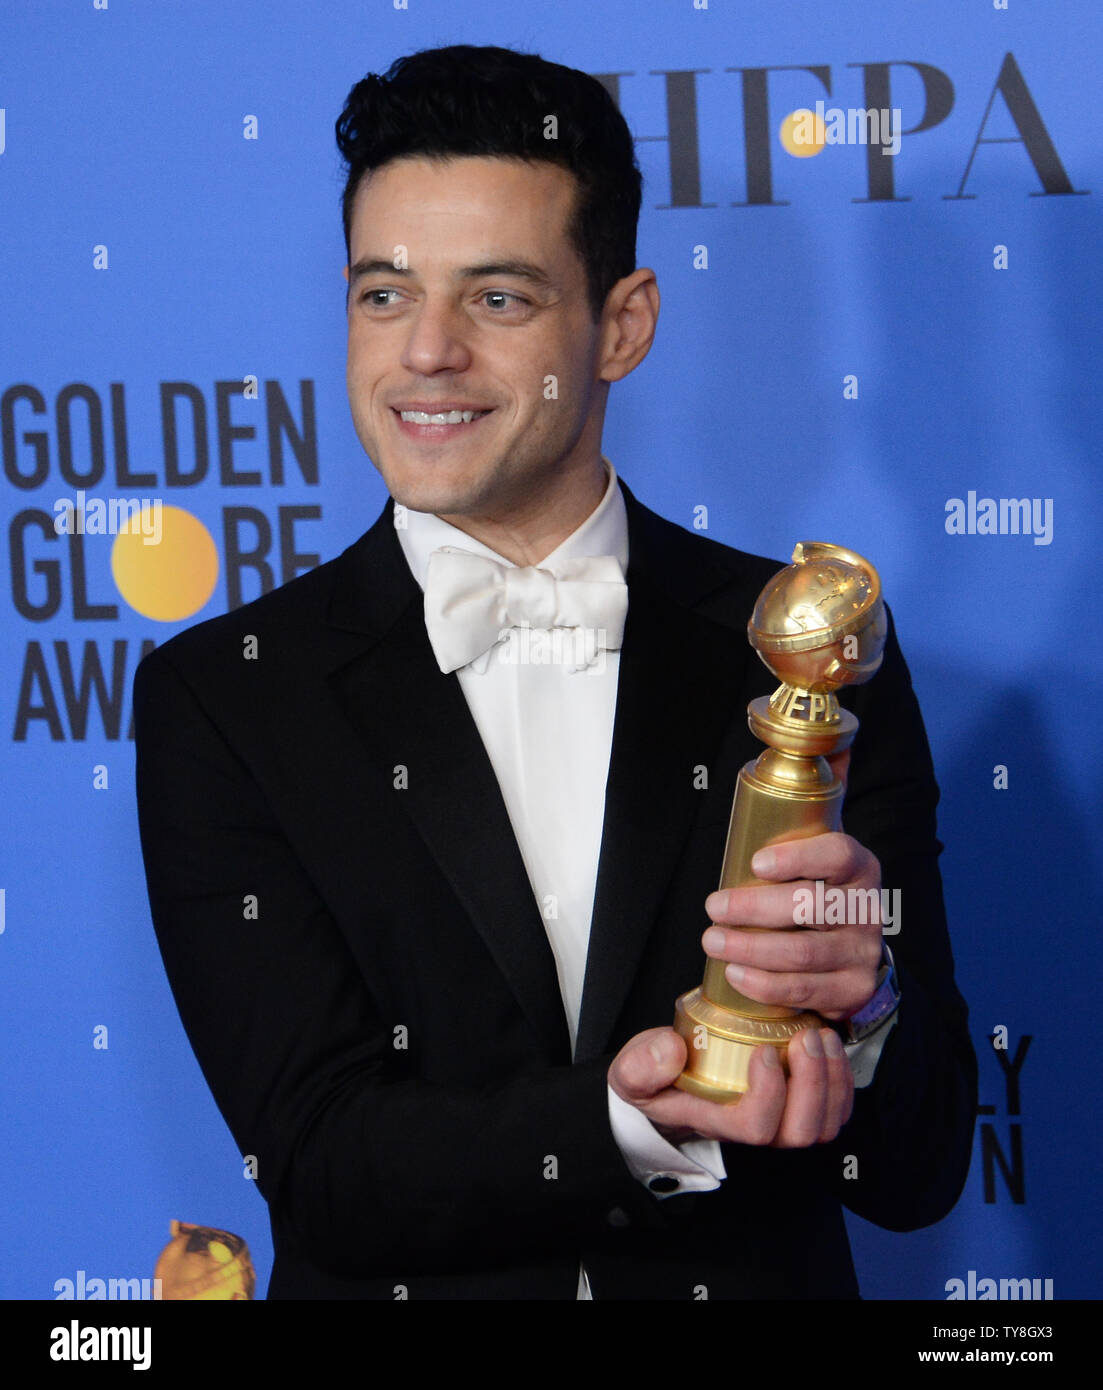 Actor Rami Malek appears backstage after winning the award for Best Actor  in a Motion Picture Drama for 'Bohemian Rhapsody' during the 76th annual  Golden Globe Awards at the Beverly Hilton Hotel